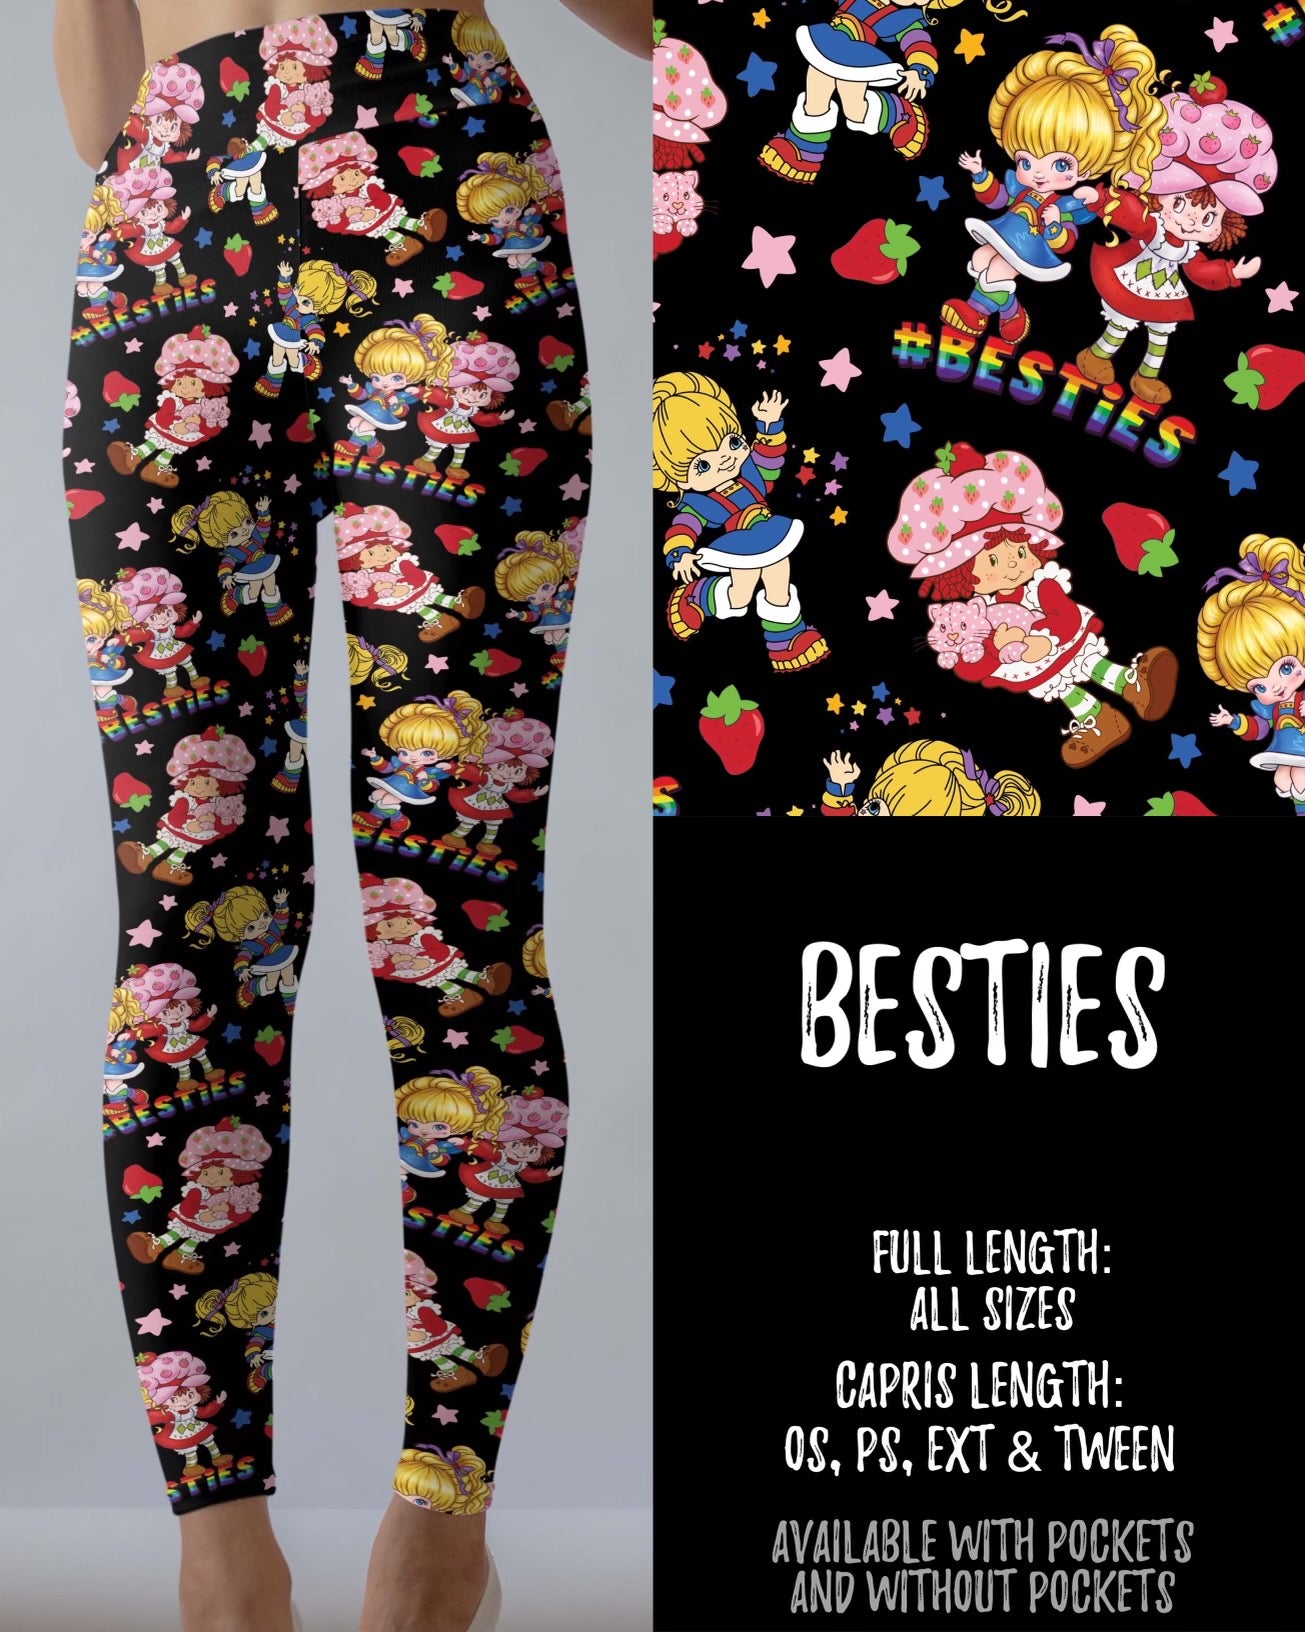 Besties Leggings with and without Pockets